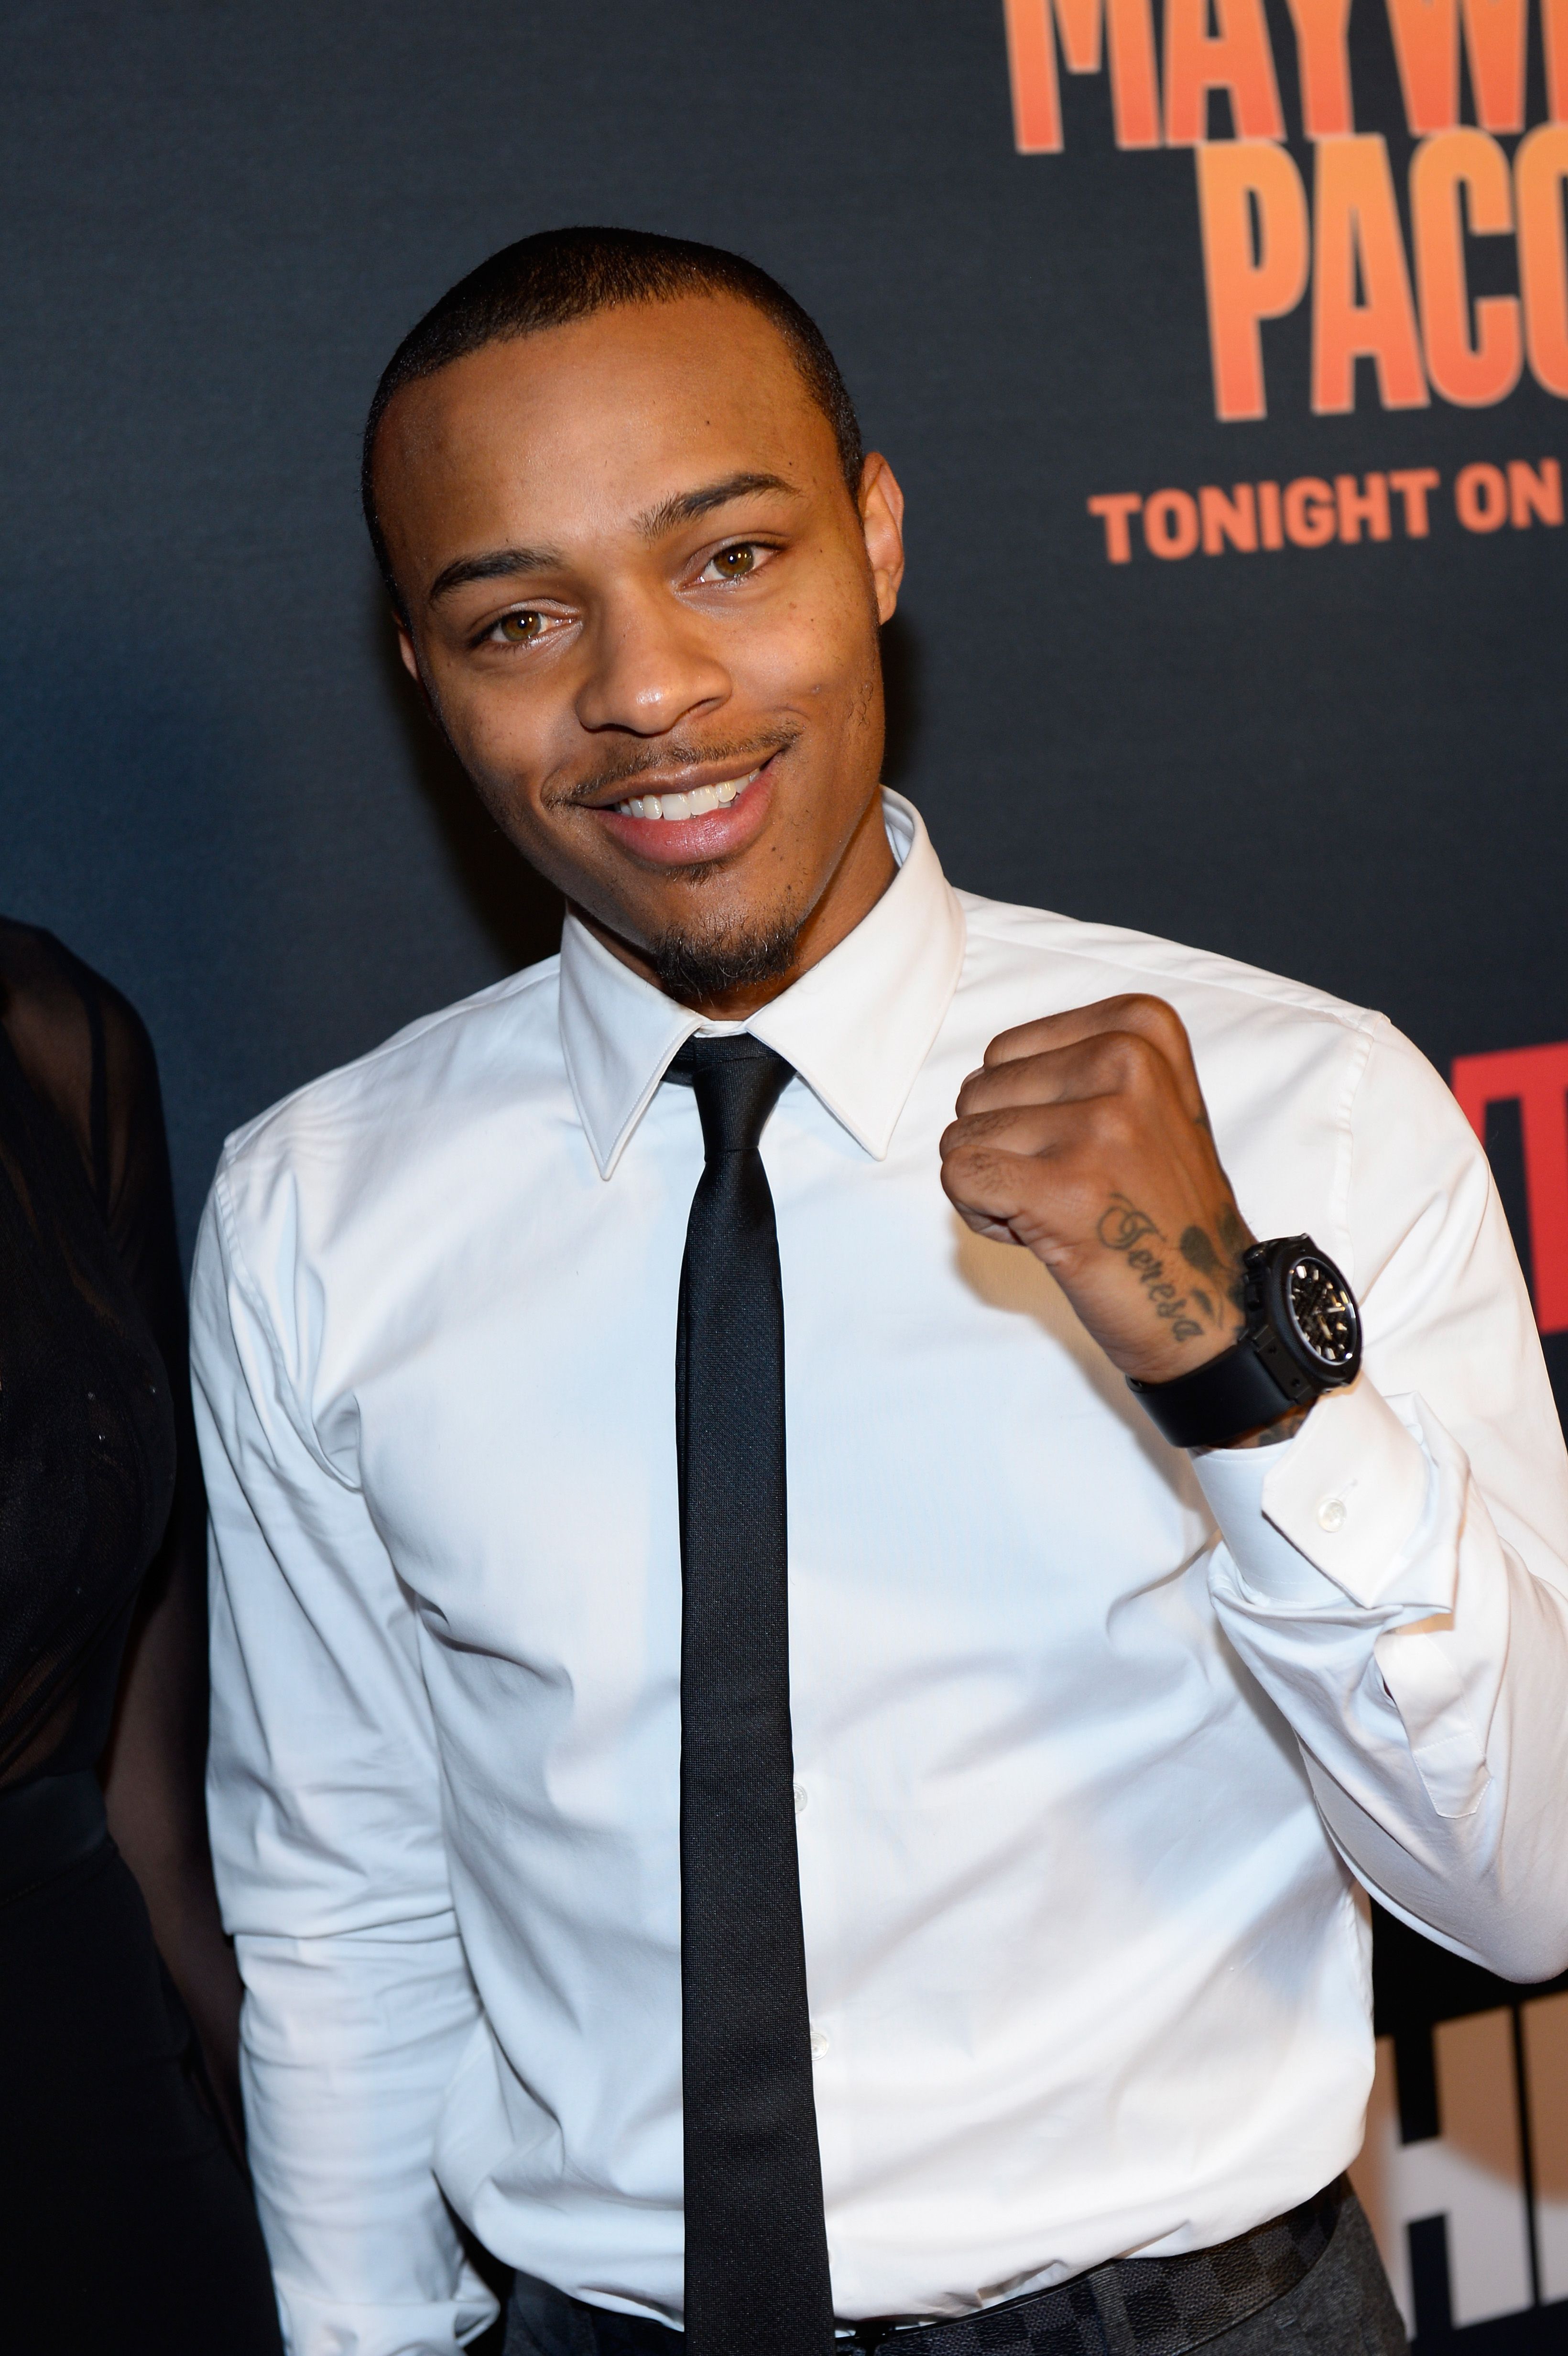 Shad Moss during the Showime And HBO VIP Pre-Fight Party for "Mayweather VS Pacquiao" at MGM Grand Hotel & Casino on May 2, 2015 in Las Vegas, Nevada. | Source: Getty Images